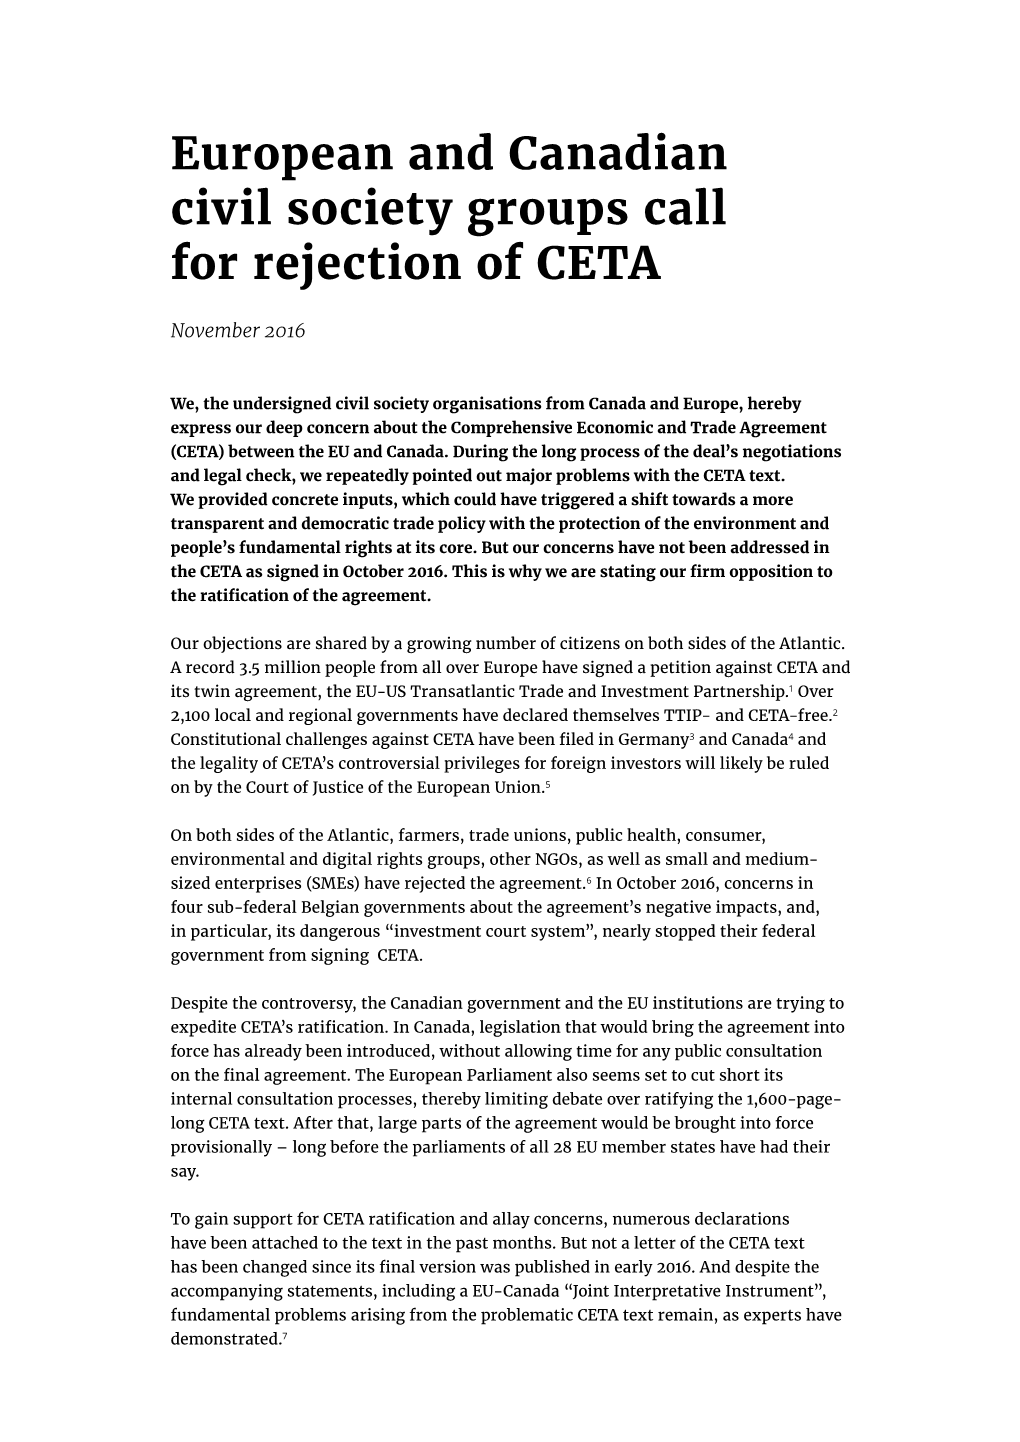 European and Canadian Civil Society Groups Call for Rejection of CETA 11